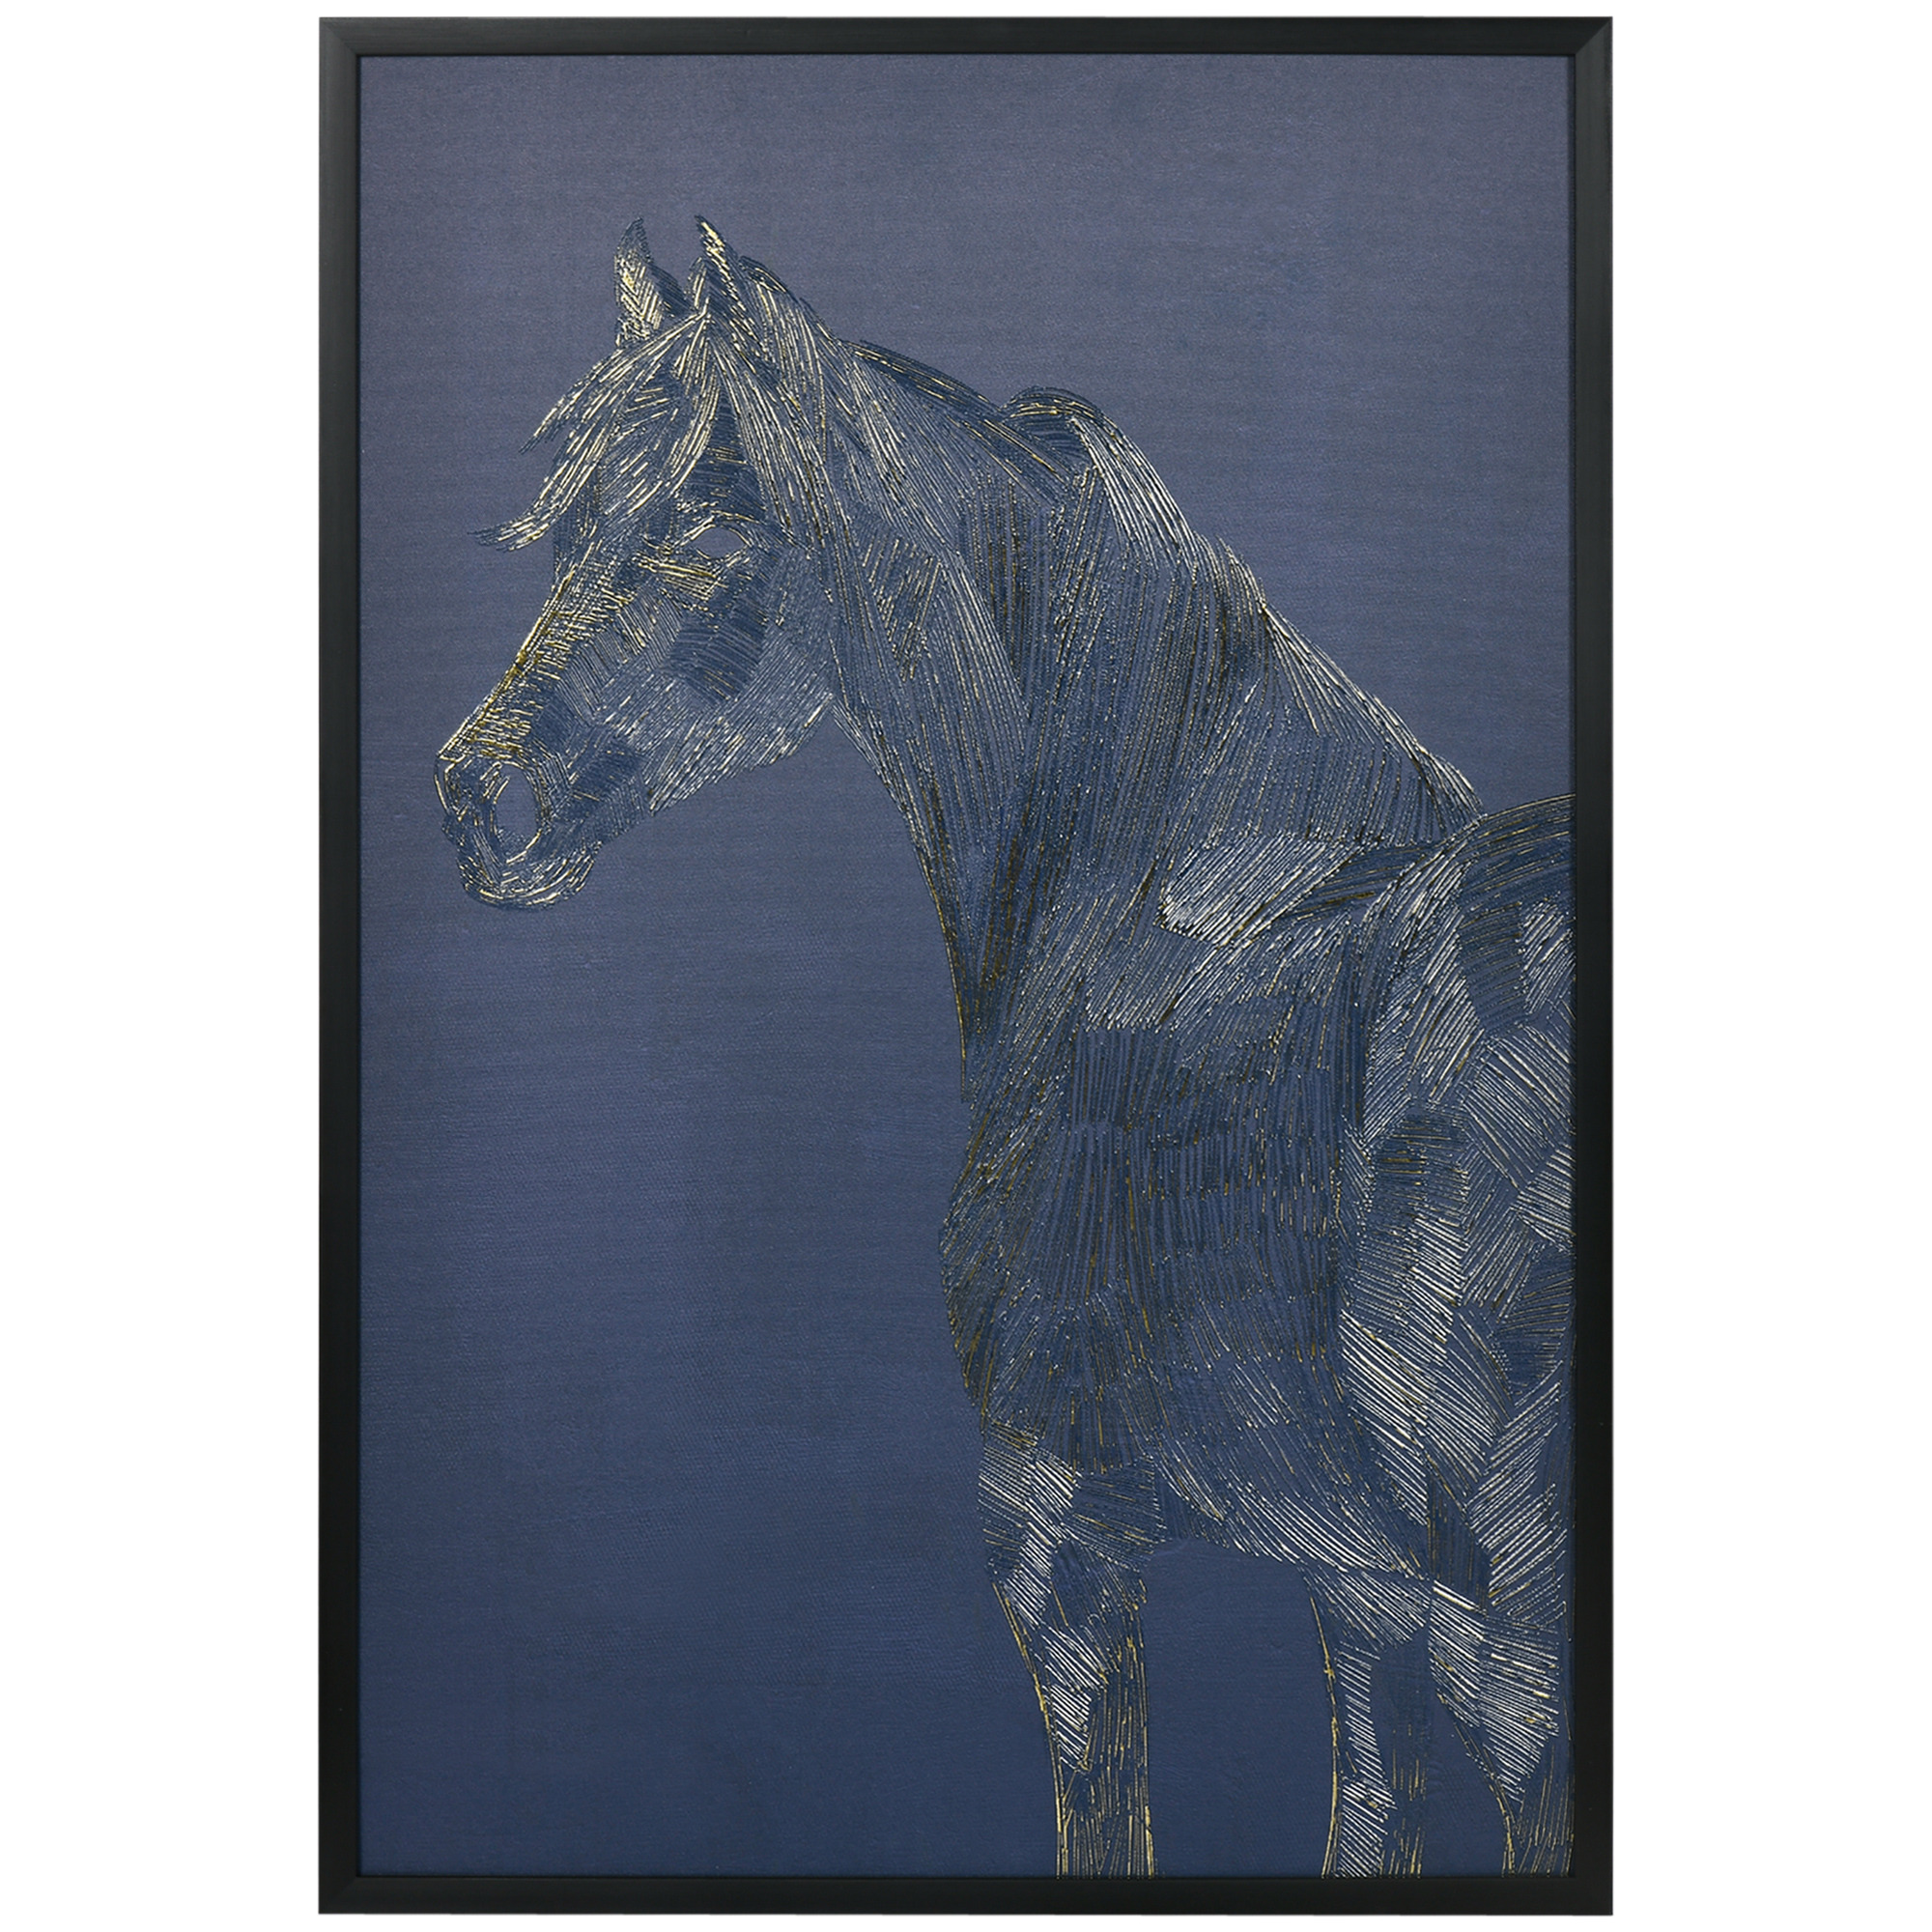 HOMCOM Canvas Wall Art Gold Textured Horse, Wall Pictures for Living Room Bedroom Decor, 93 x 63 cm